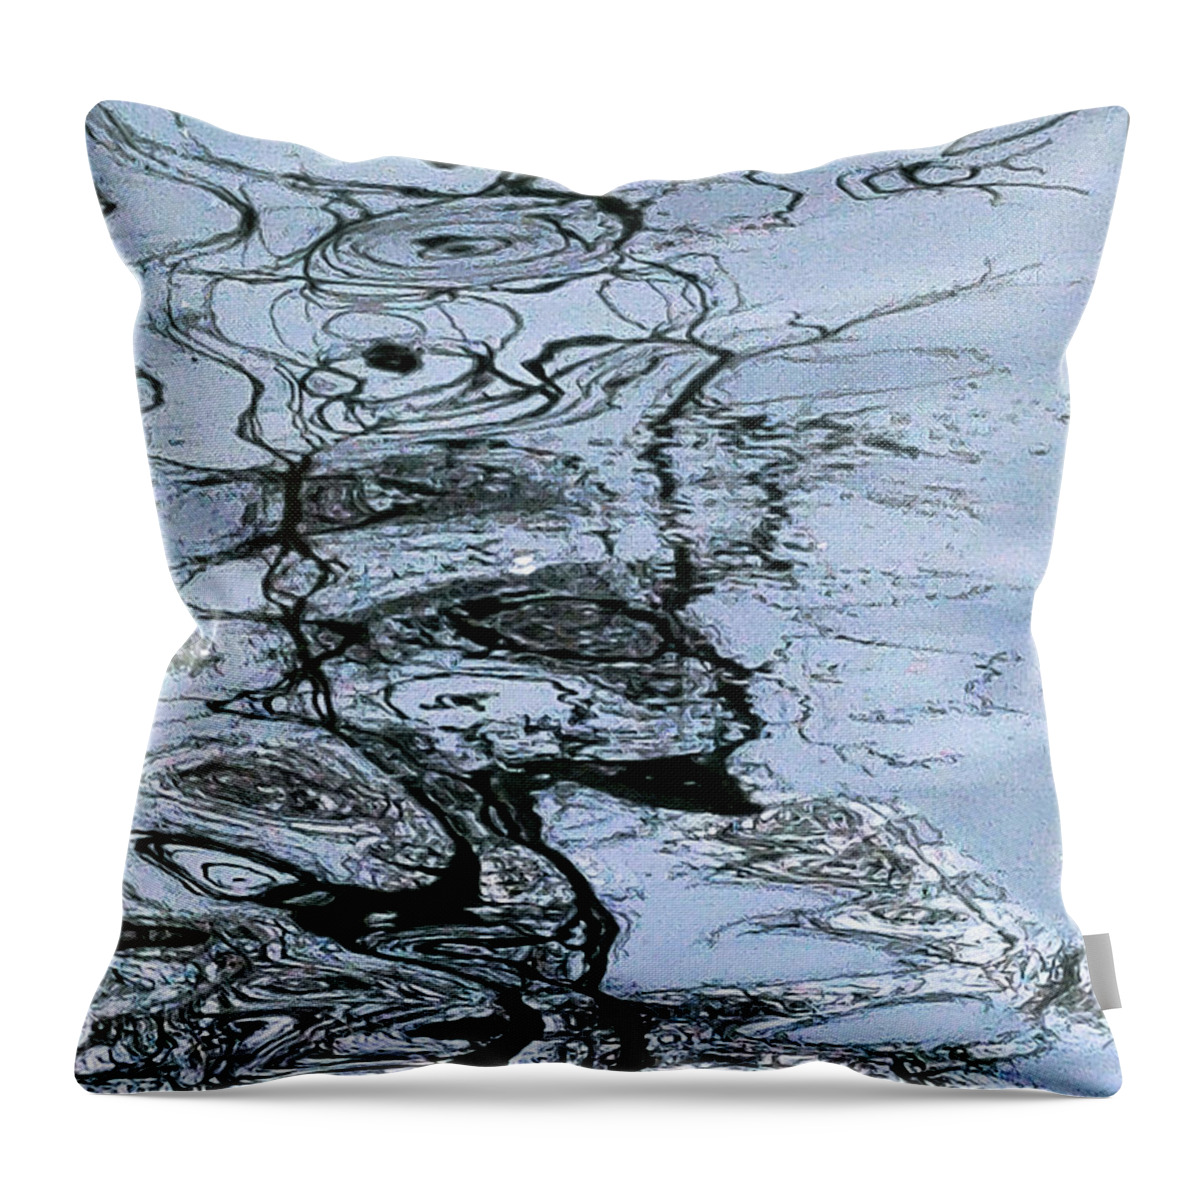 Water Throw Pillow featuring the photograph Tree Reflection Distorted by Kae Cheatham